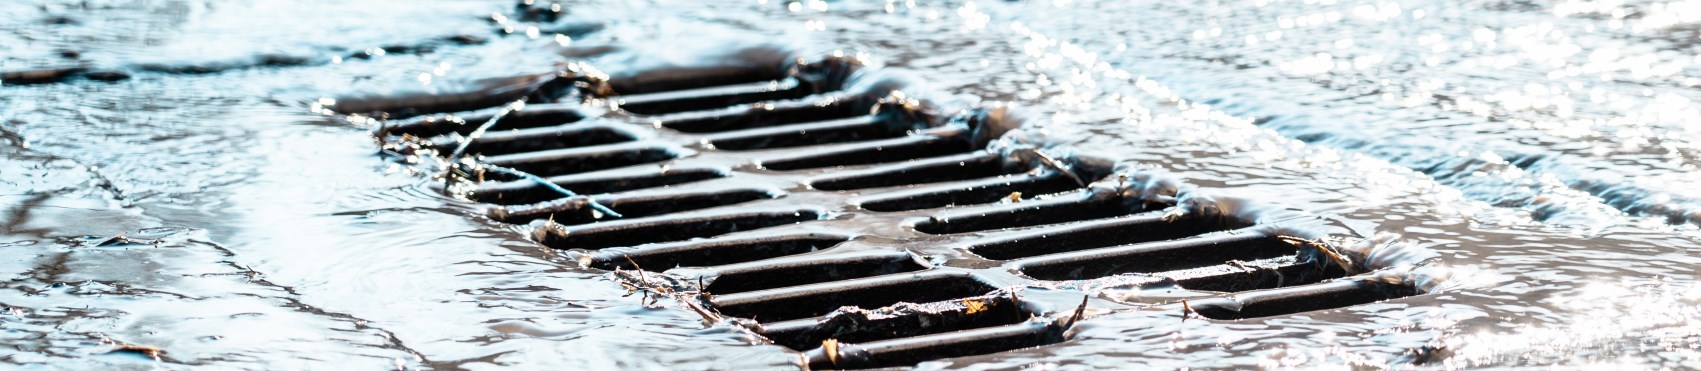 Image of a stormwater drain receiving water from a street.